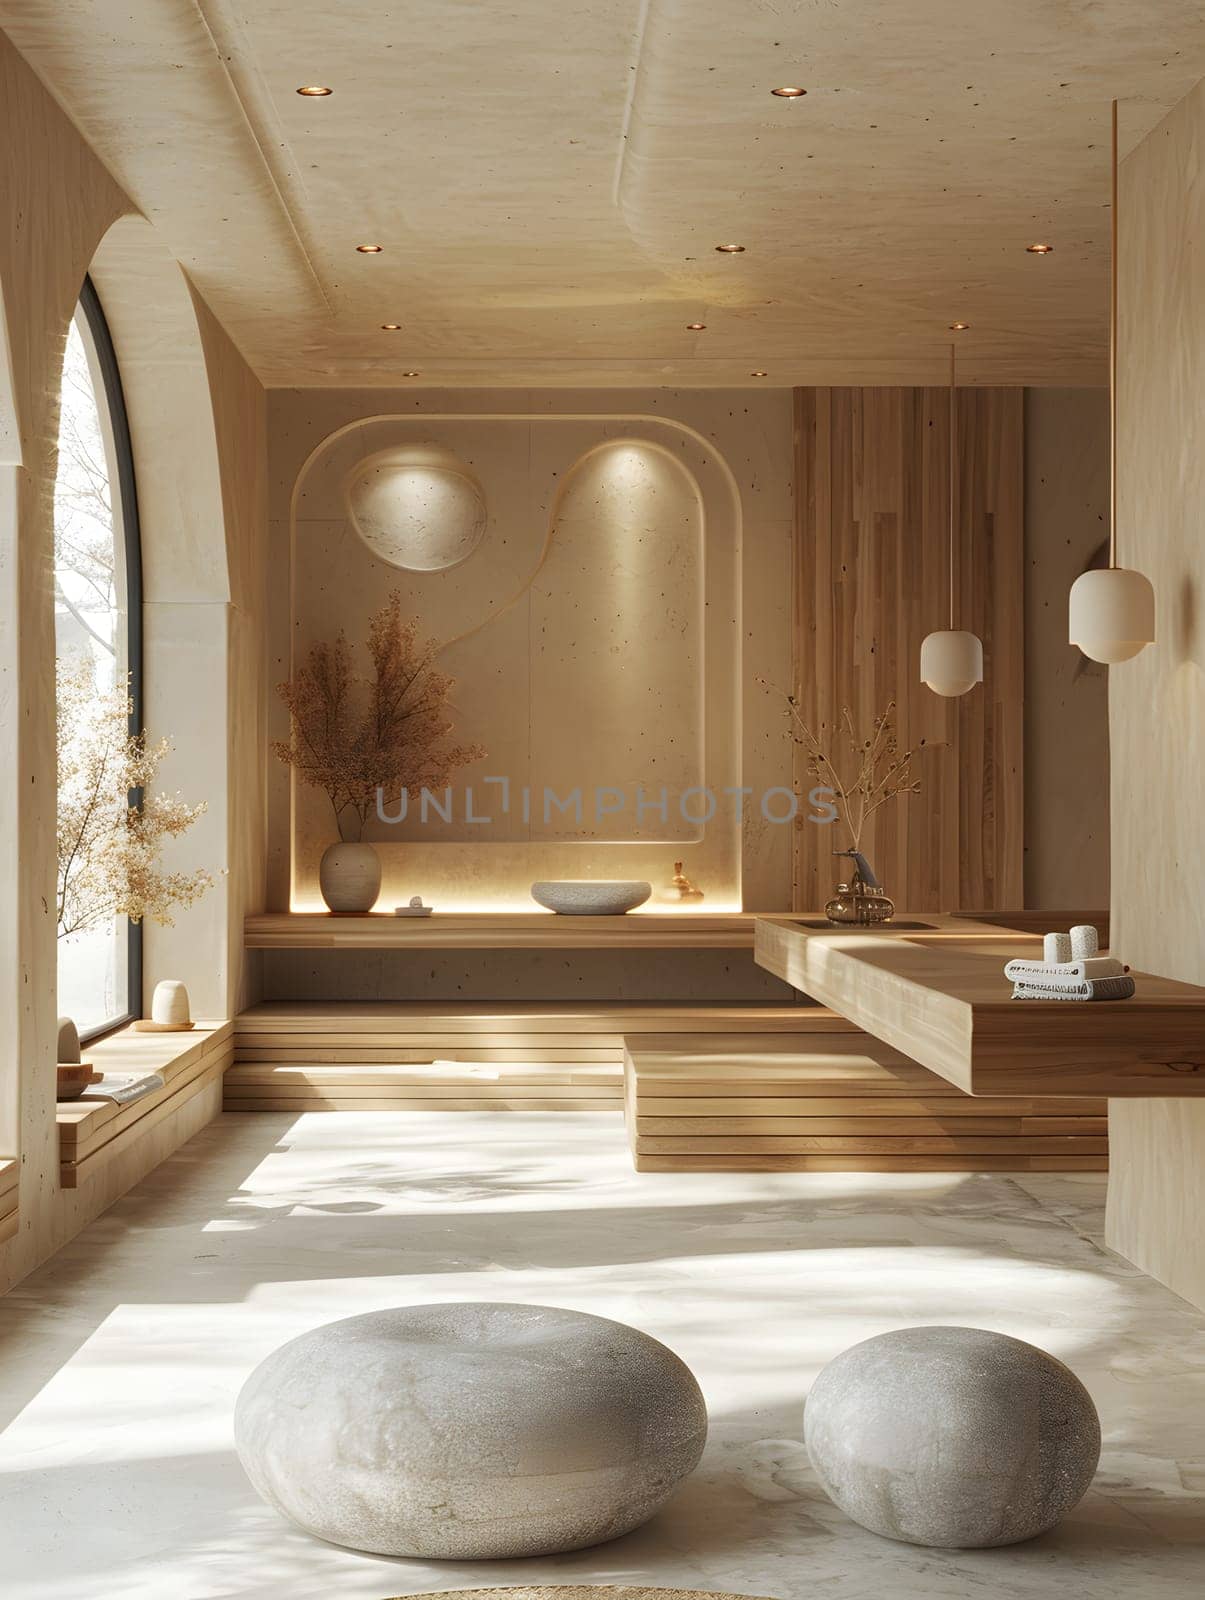 Bathroom in a house with bathtub, sink, and two rocks on the floor by Nadtochiy